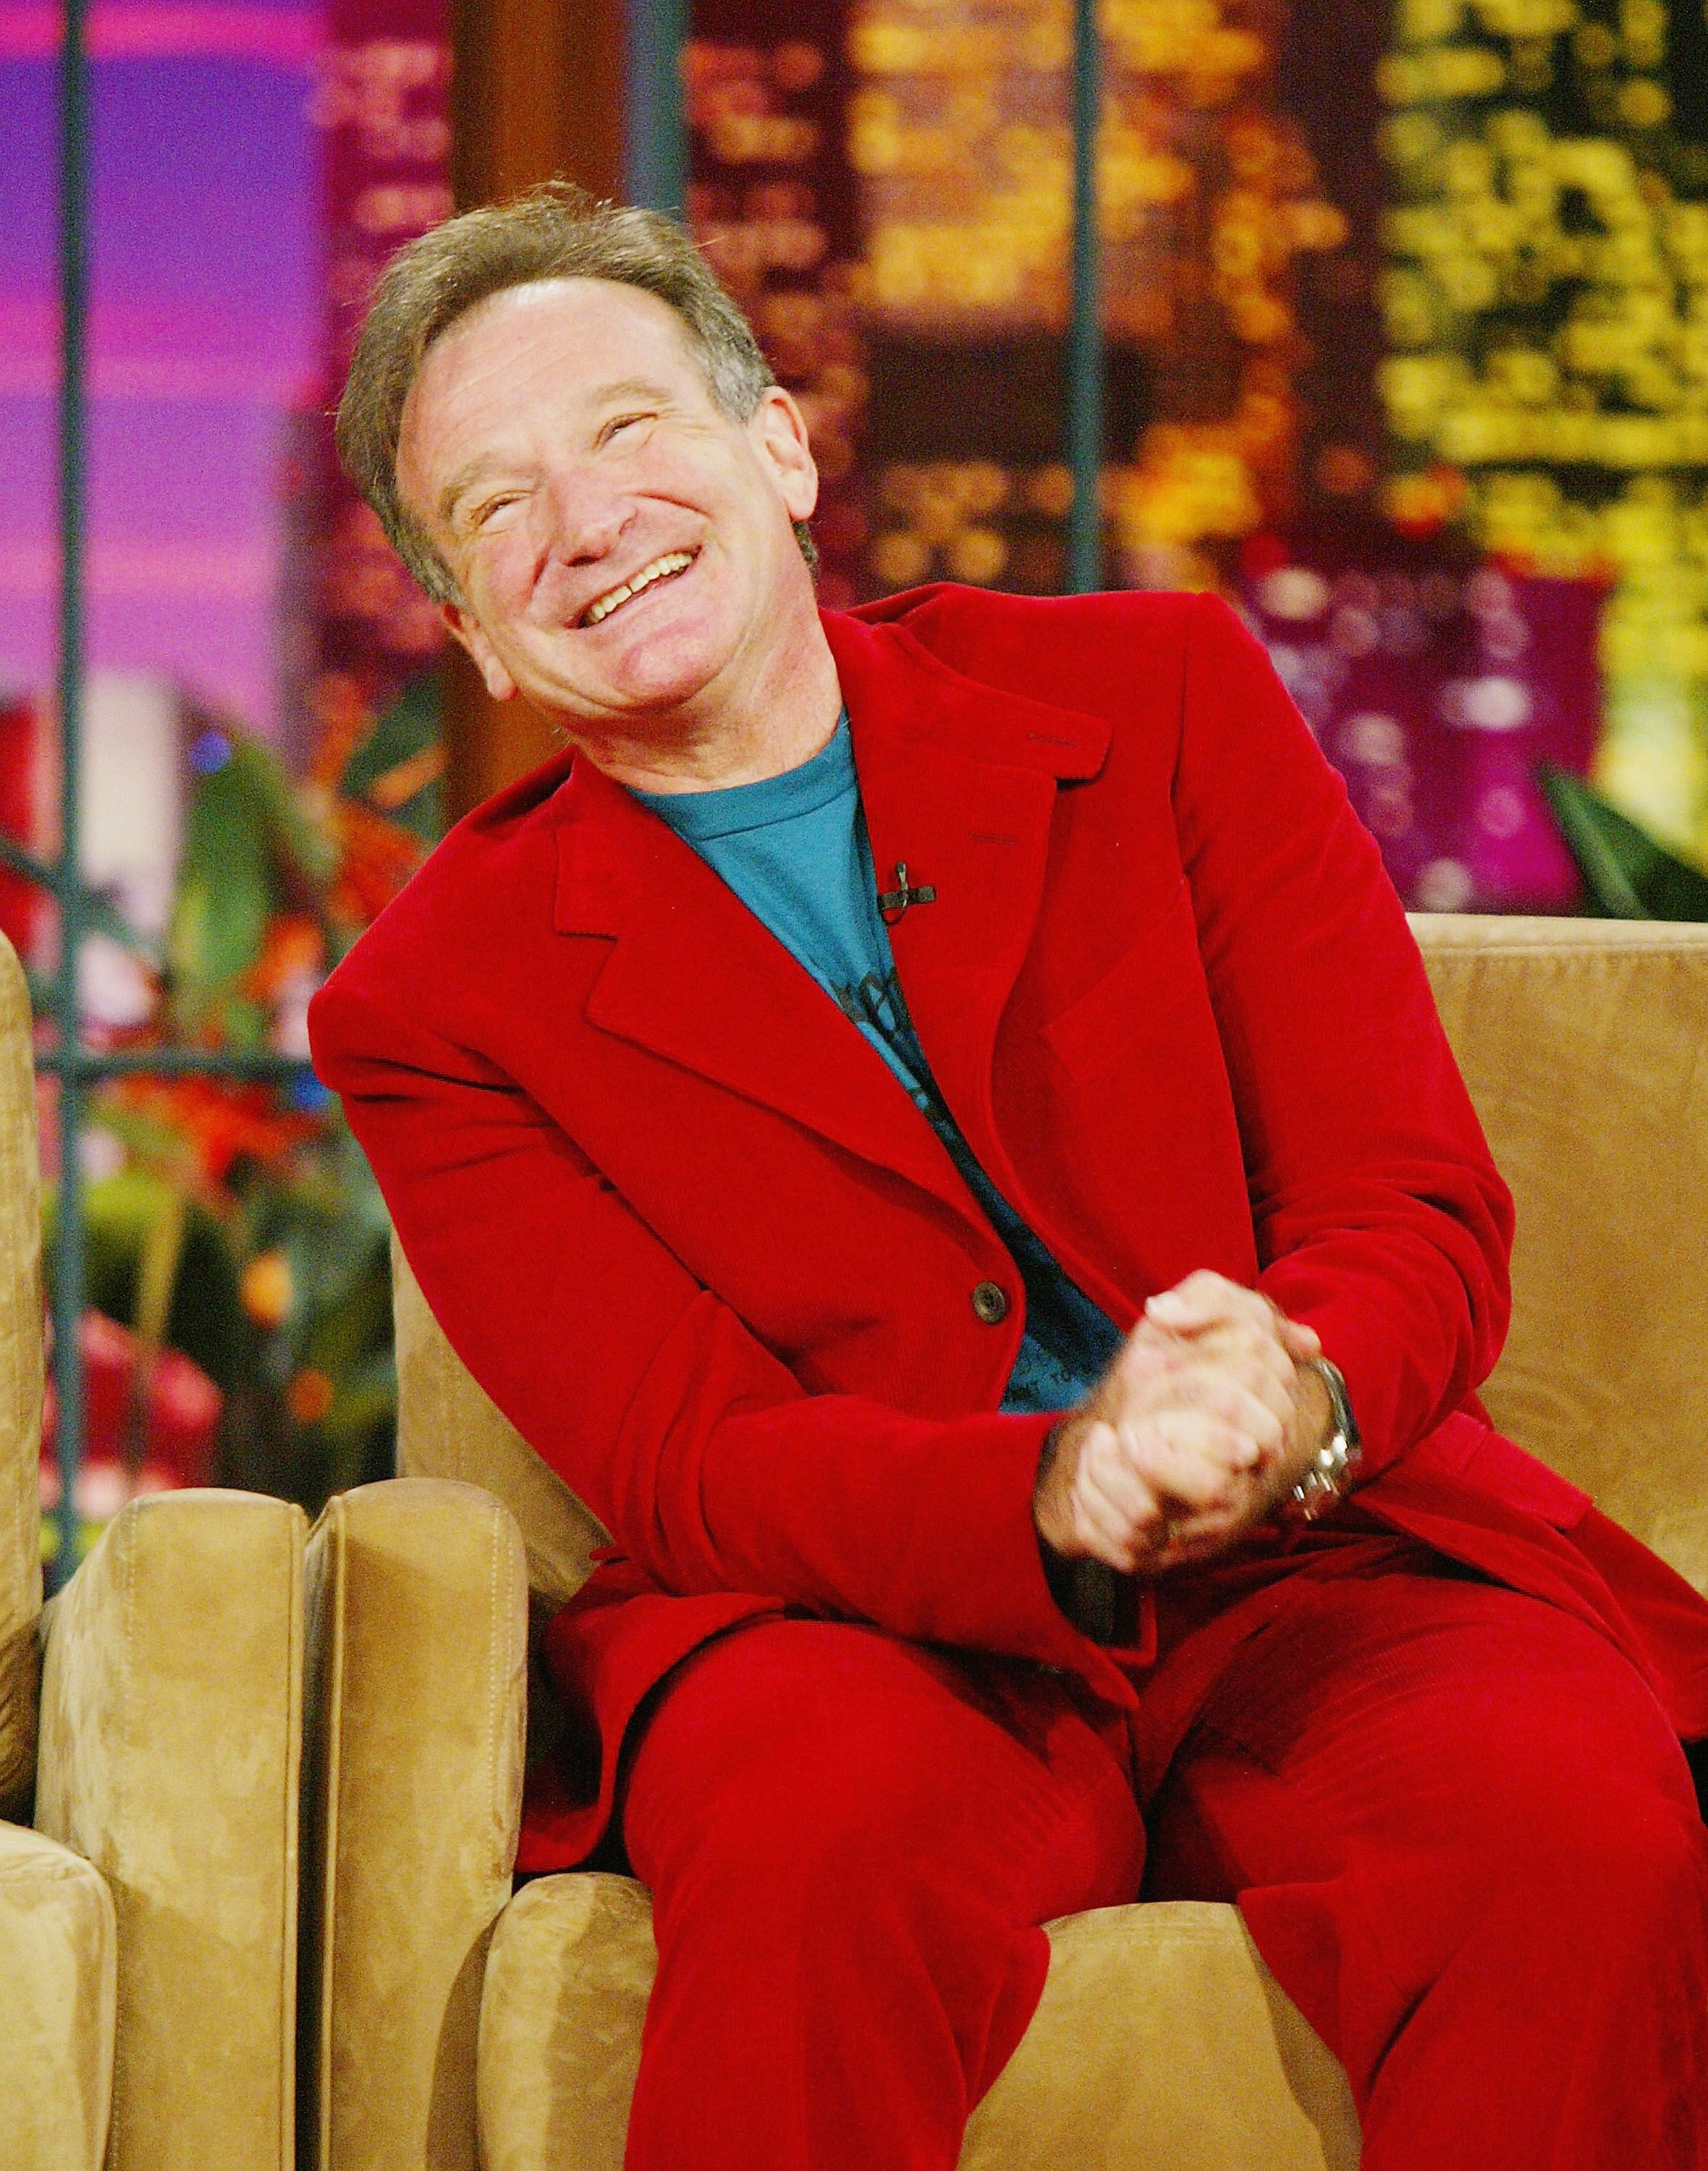 Robin Williams apparaît dans "The Tonight Show with Jay Leno". | Source : Getty Images